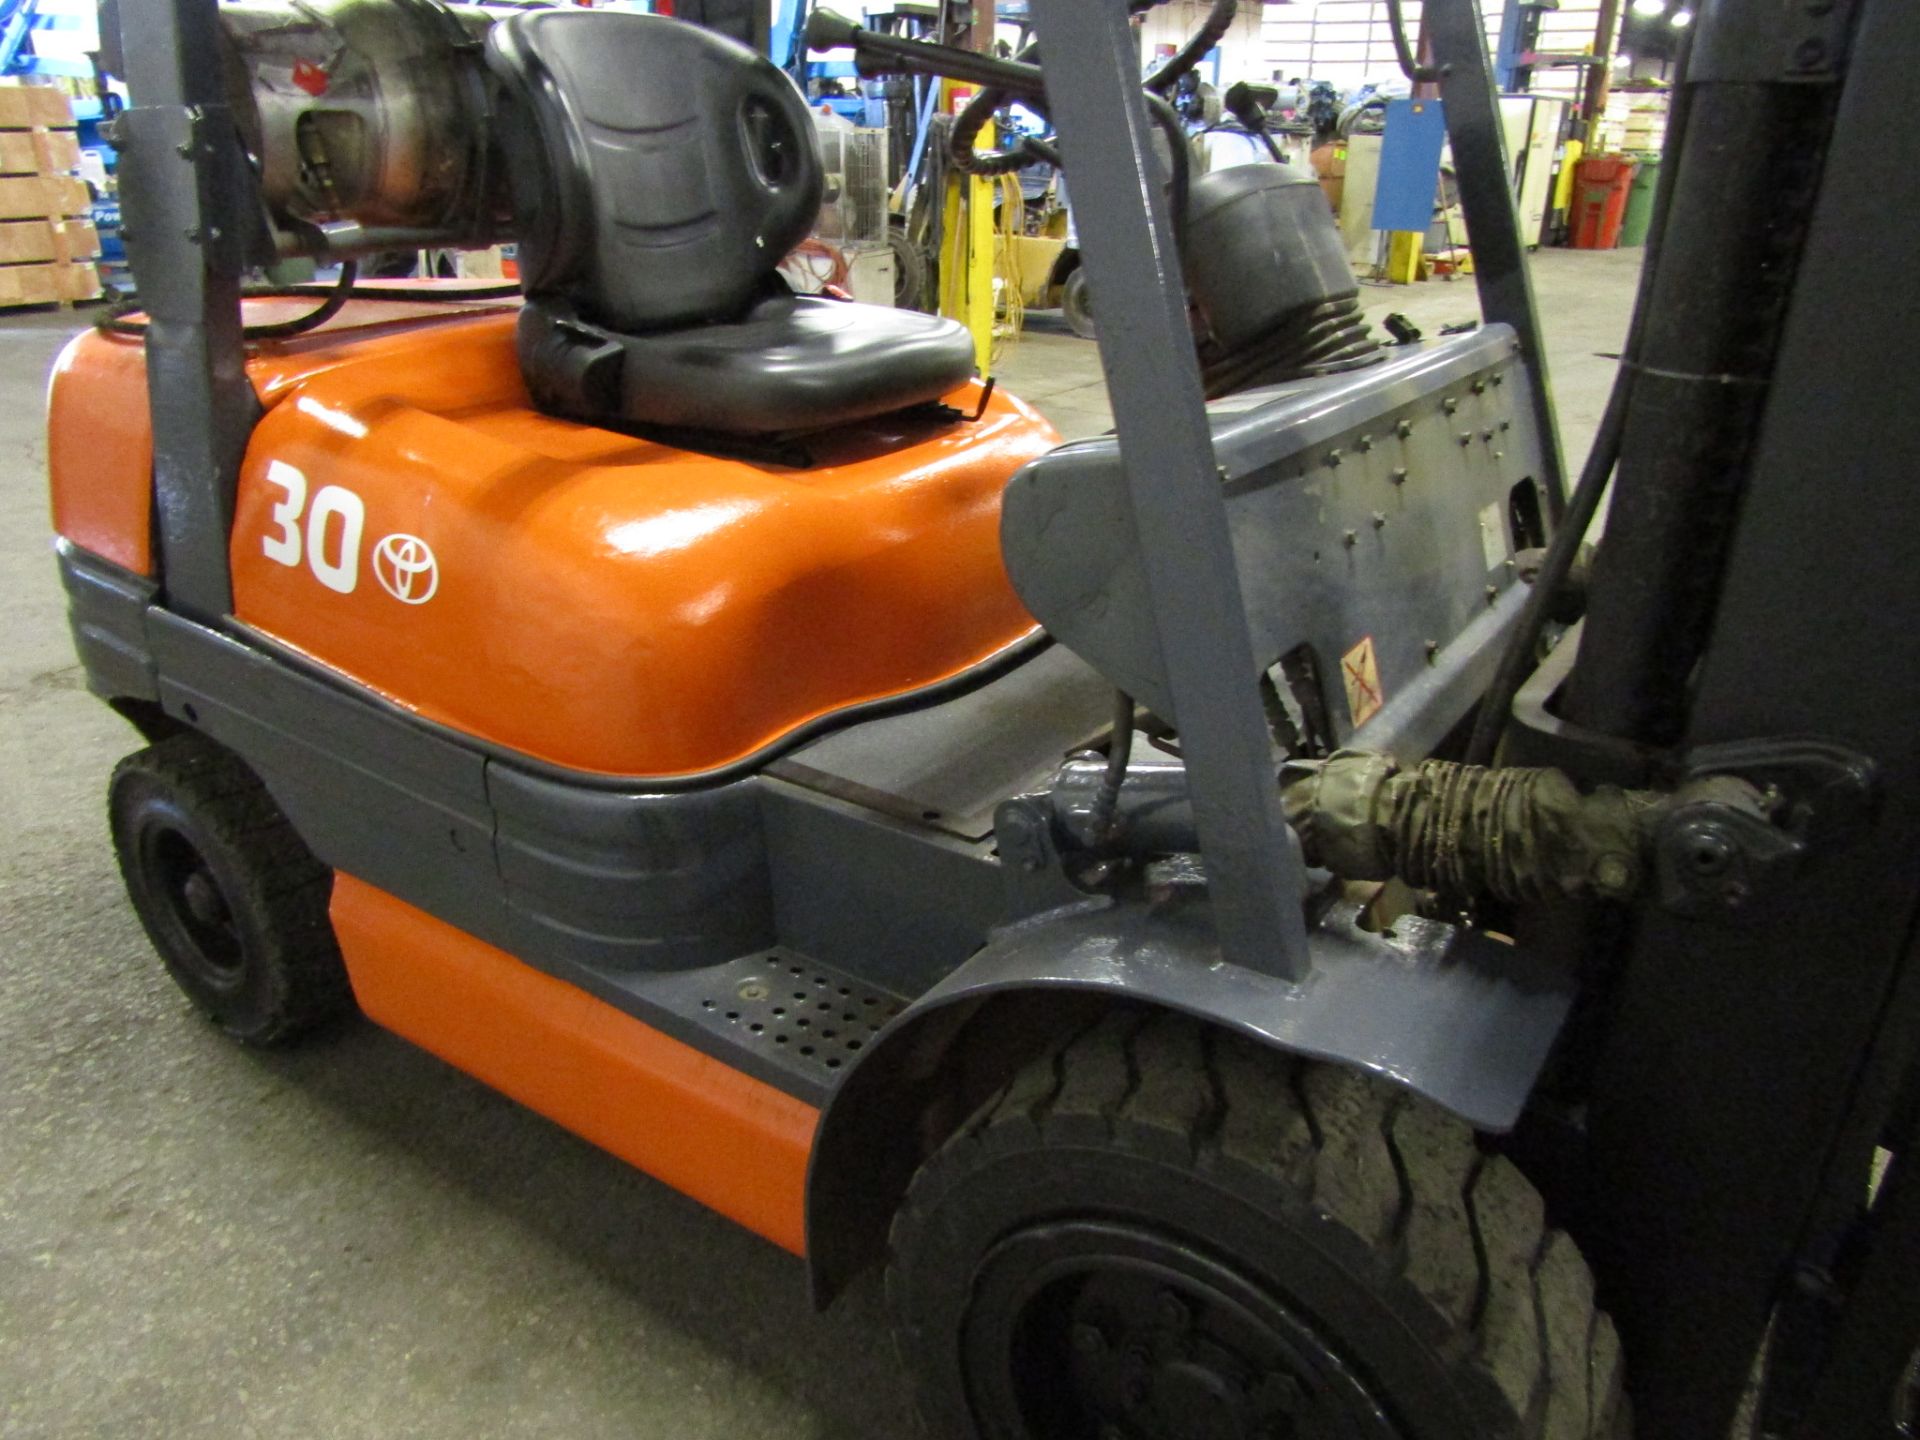 Toyota OUTDOOR 6000lbs Capacity Forklift with 3-stage mast LPG (propane) - Image 2 of 3